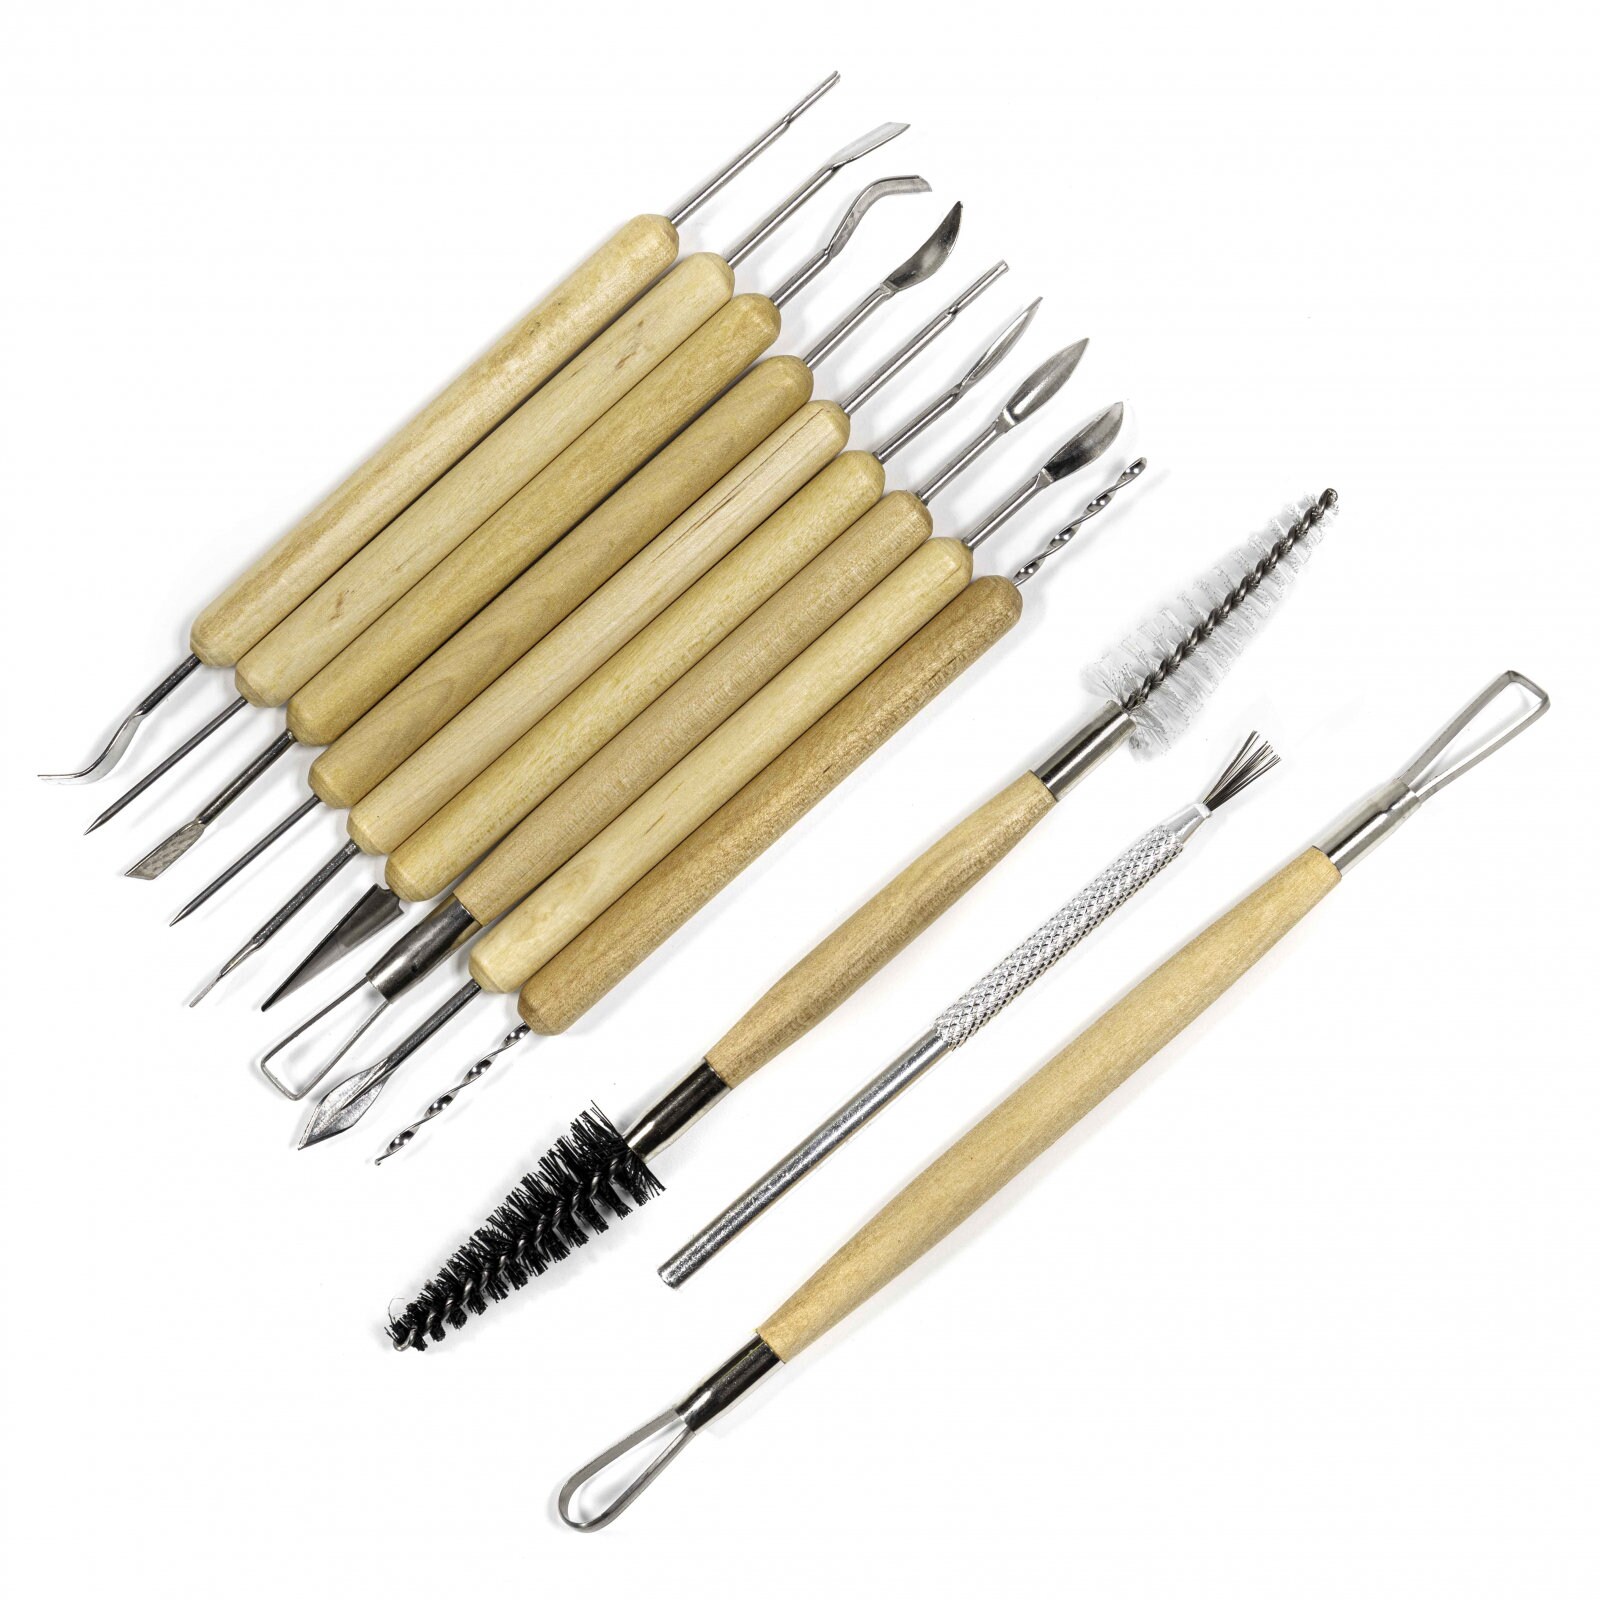 16 Pieces Wooden Handle Clay Pottery Sculpting Tools Polymer Clay